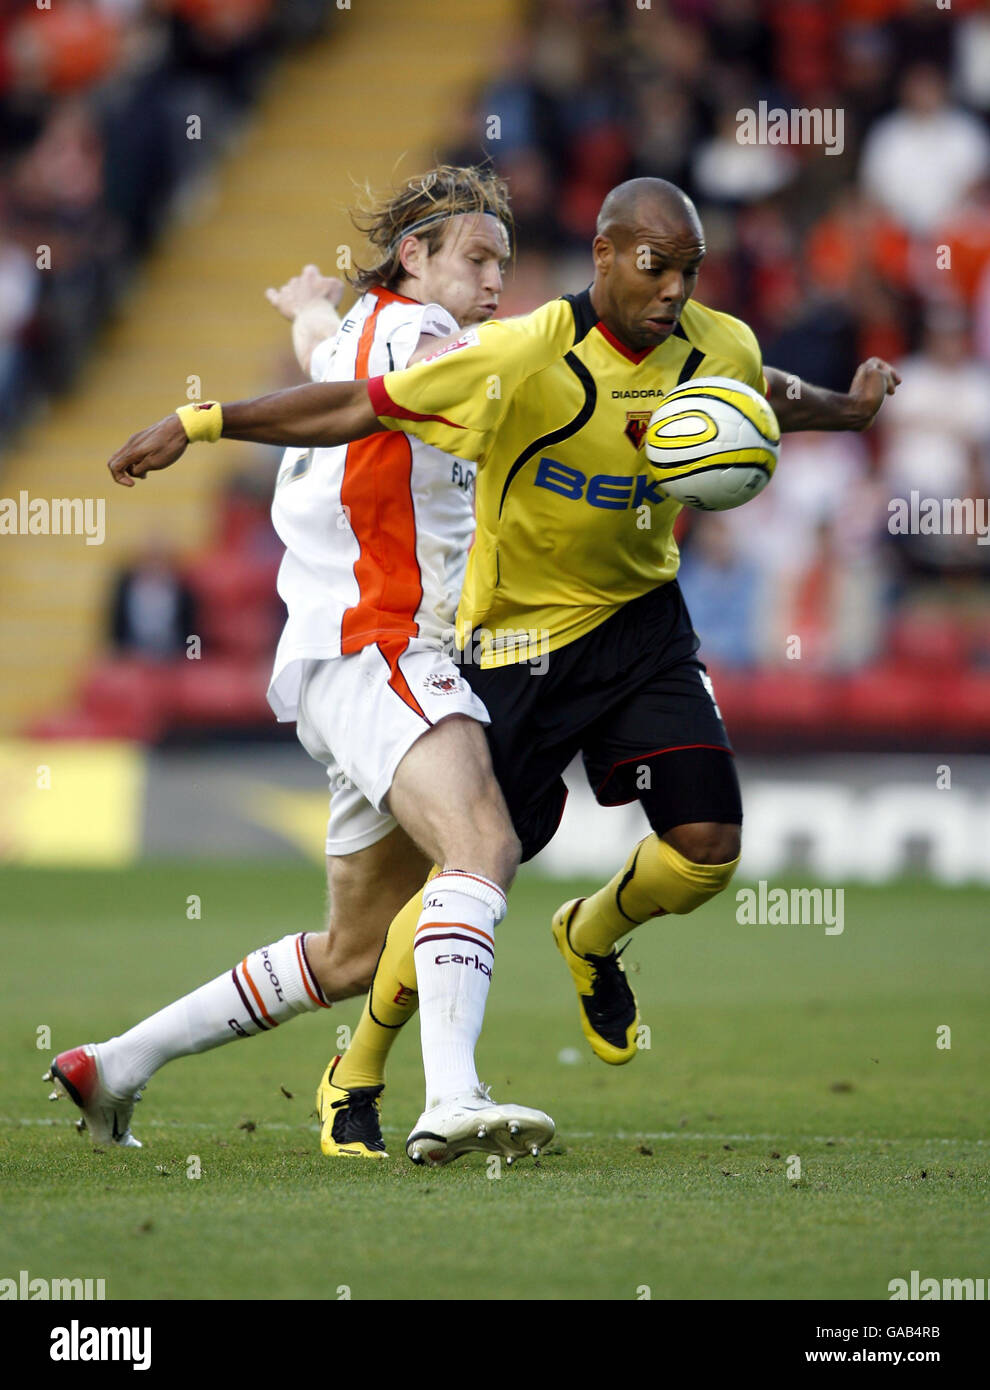 Watford's Marlon King (right) is challenged by Blackpool's Kaspars Gorkss during the Coca-Cola Football League Championship match at Vicarage Road, Watford. Stock Photo